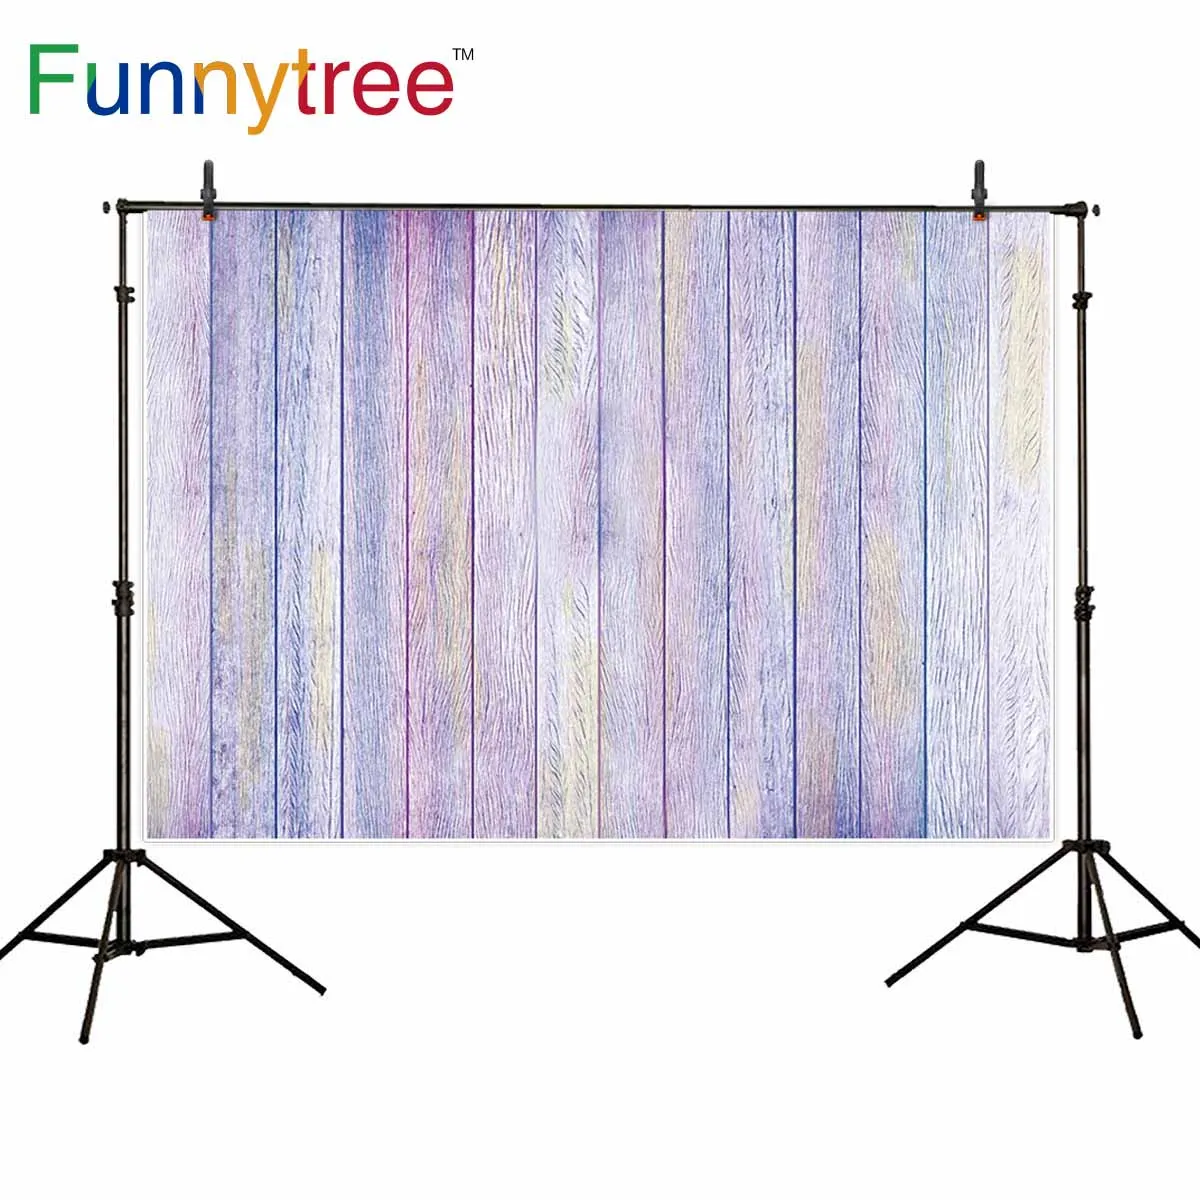 

Funnytree backgrounds for photography studio light purple vintage wood board professional backdrop photocall photobooth prop